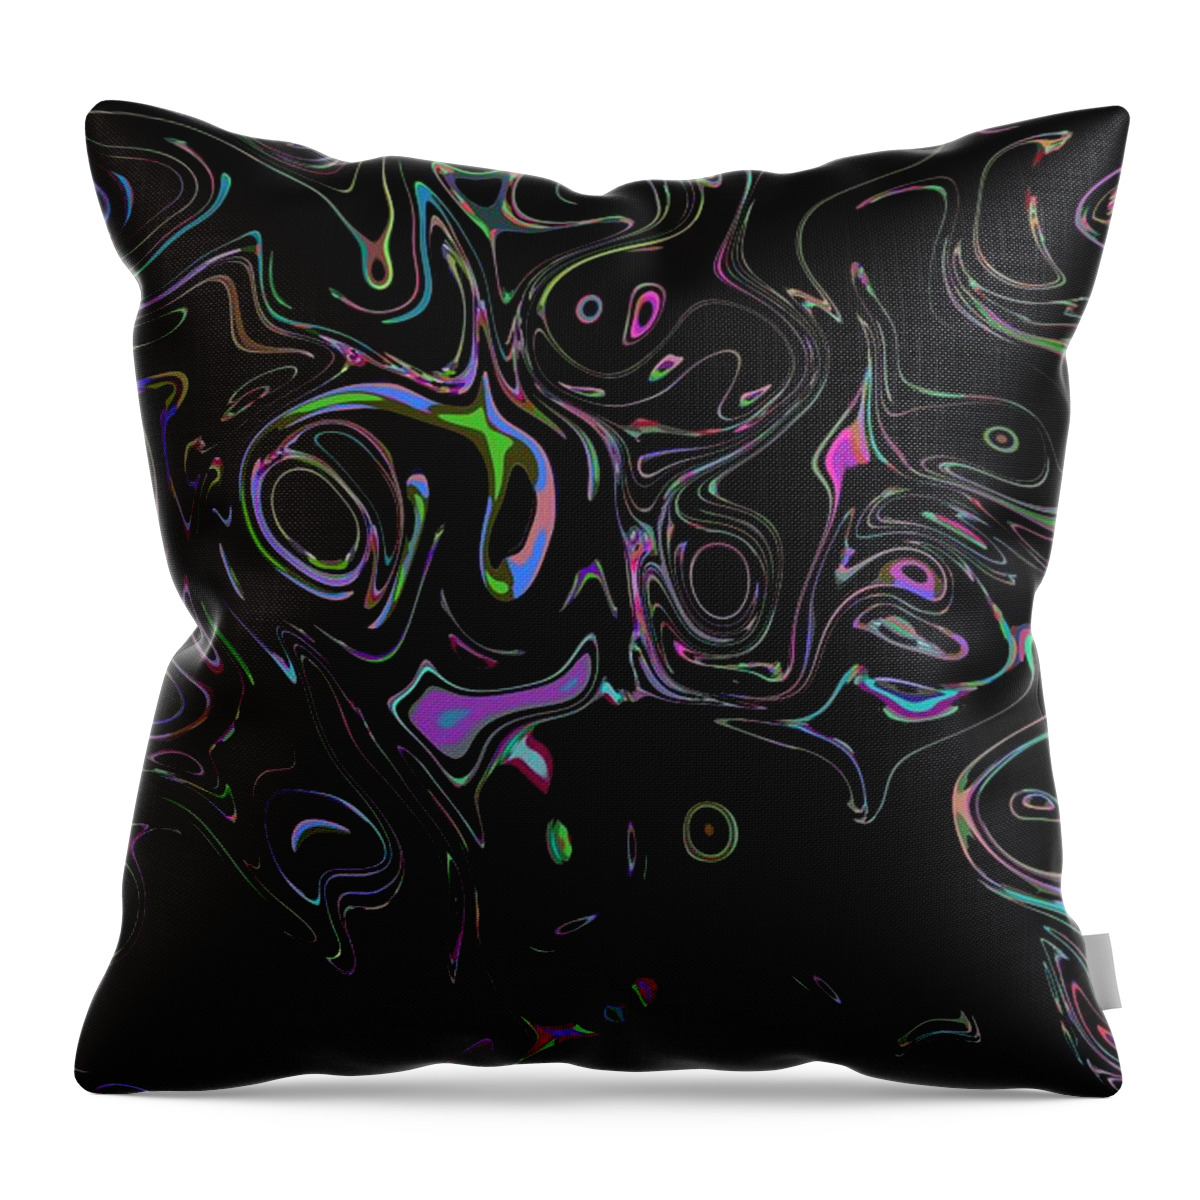 Zorbazz Throw Pillow featuring the photograph Zorbazz by Mark Blauhoefer